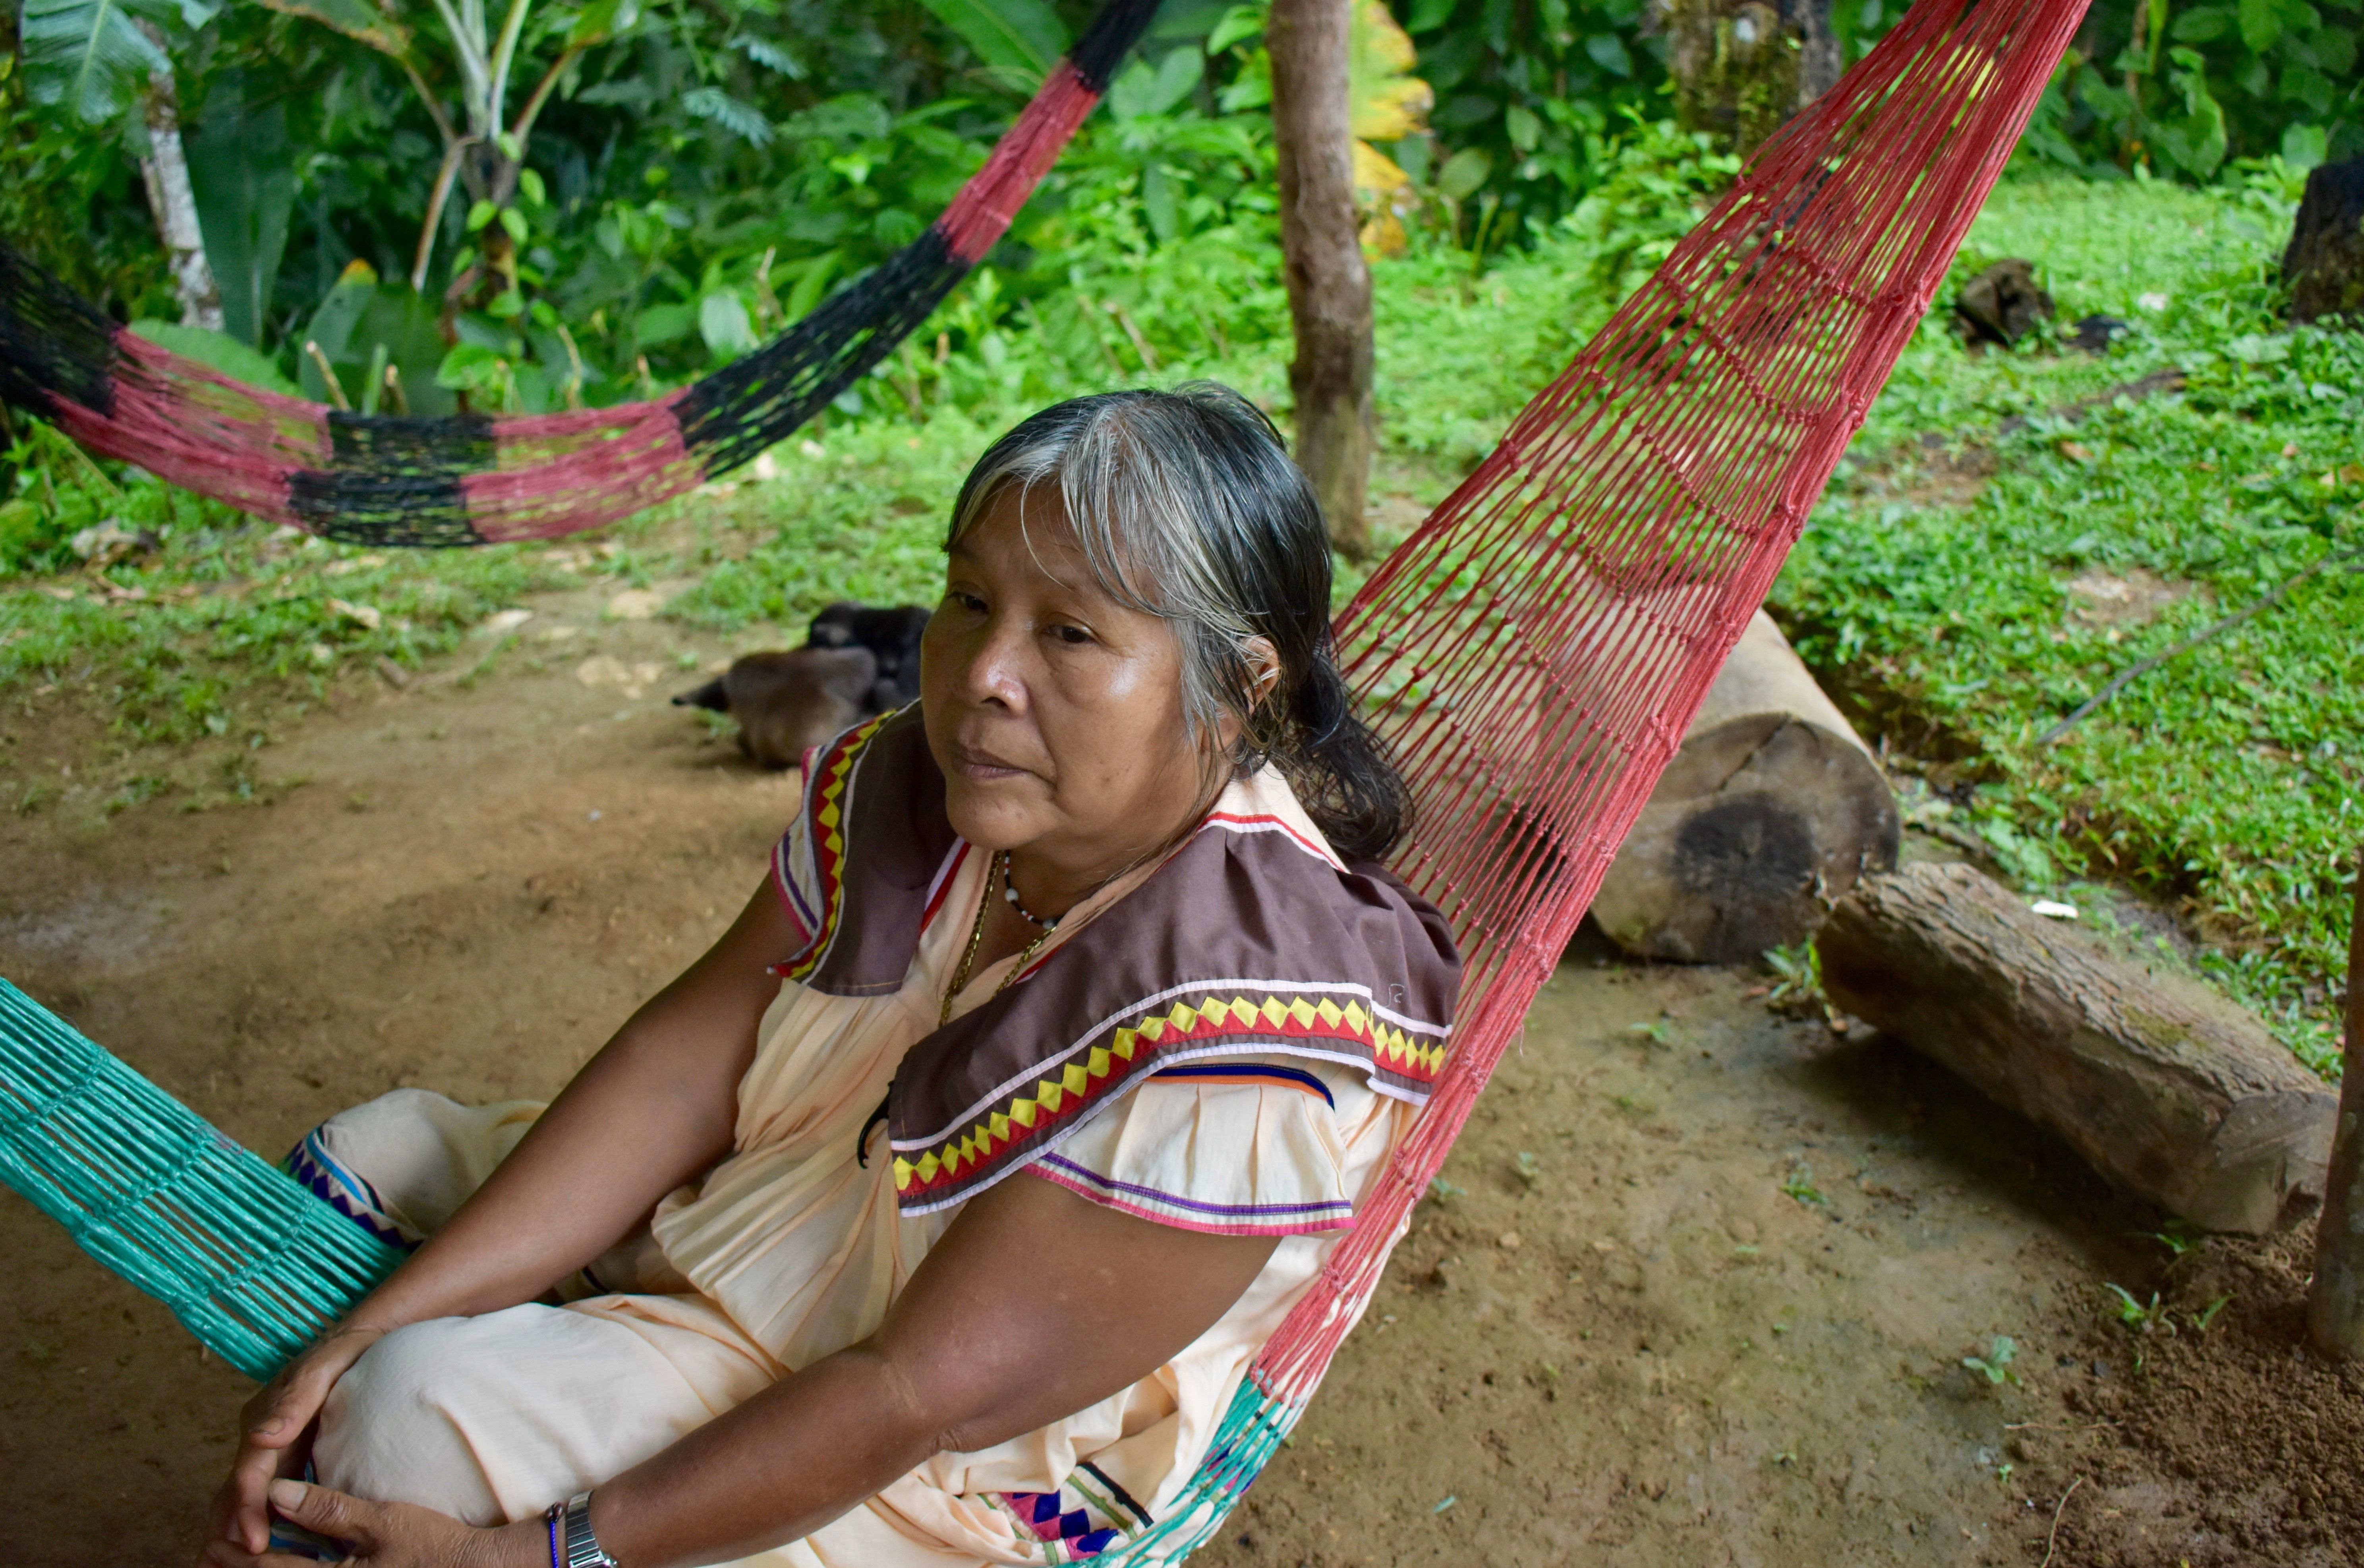 Doña Maria sits outside her home in an indigenous territory in Costa Rica, waiting to share her experiences working as a midwife for the Ngäbe-Buglé community. Image by Samira Tella. Costa Rica, 2018.